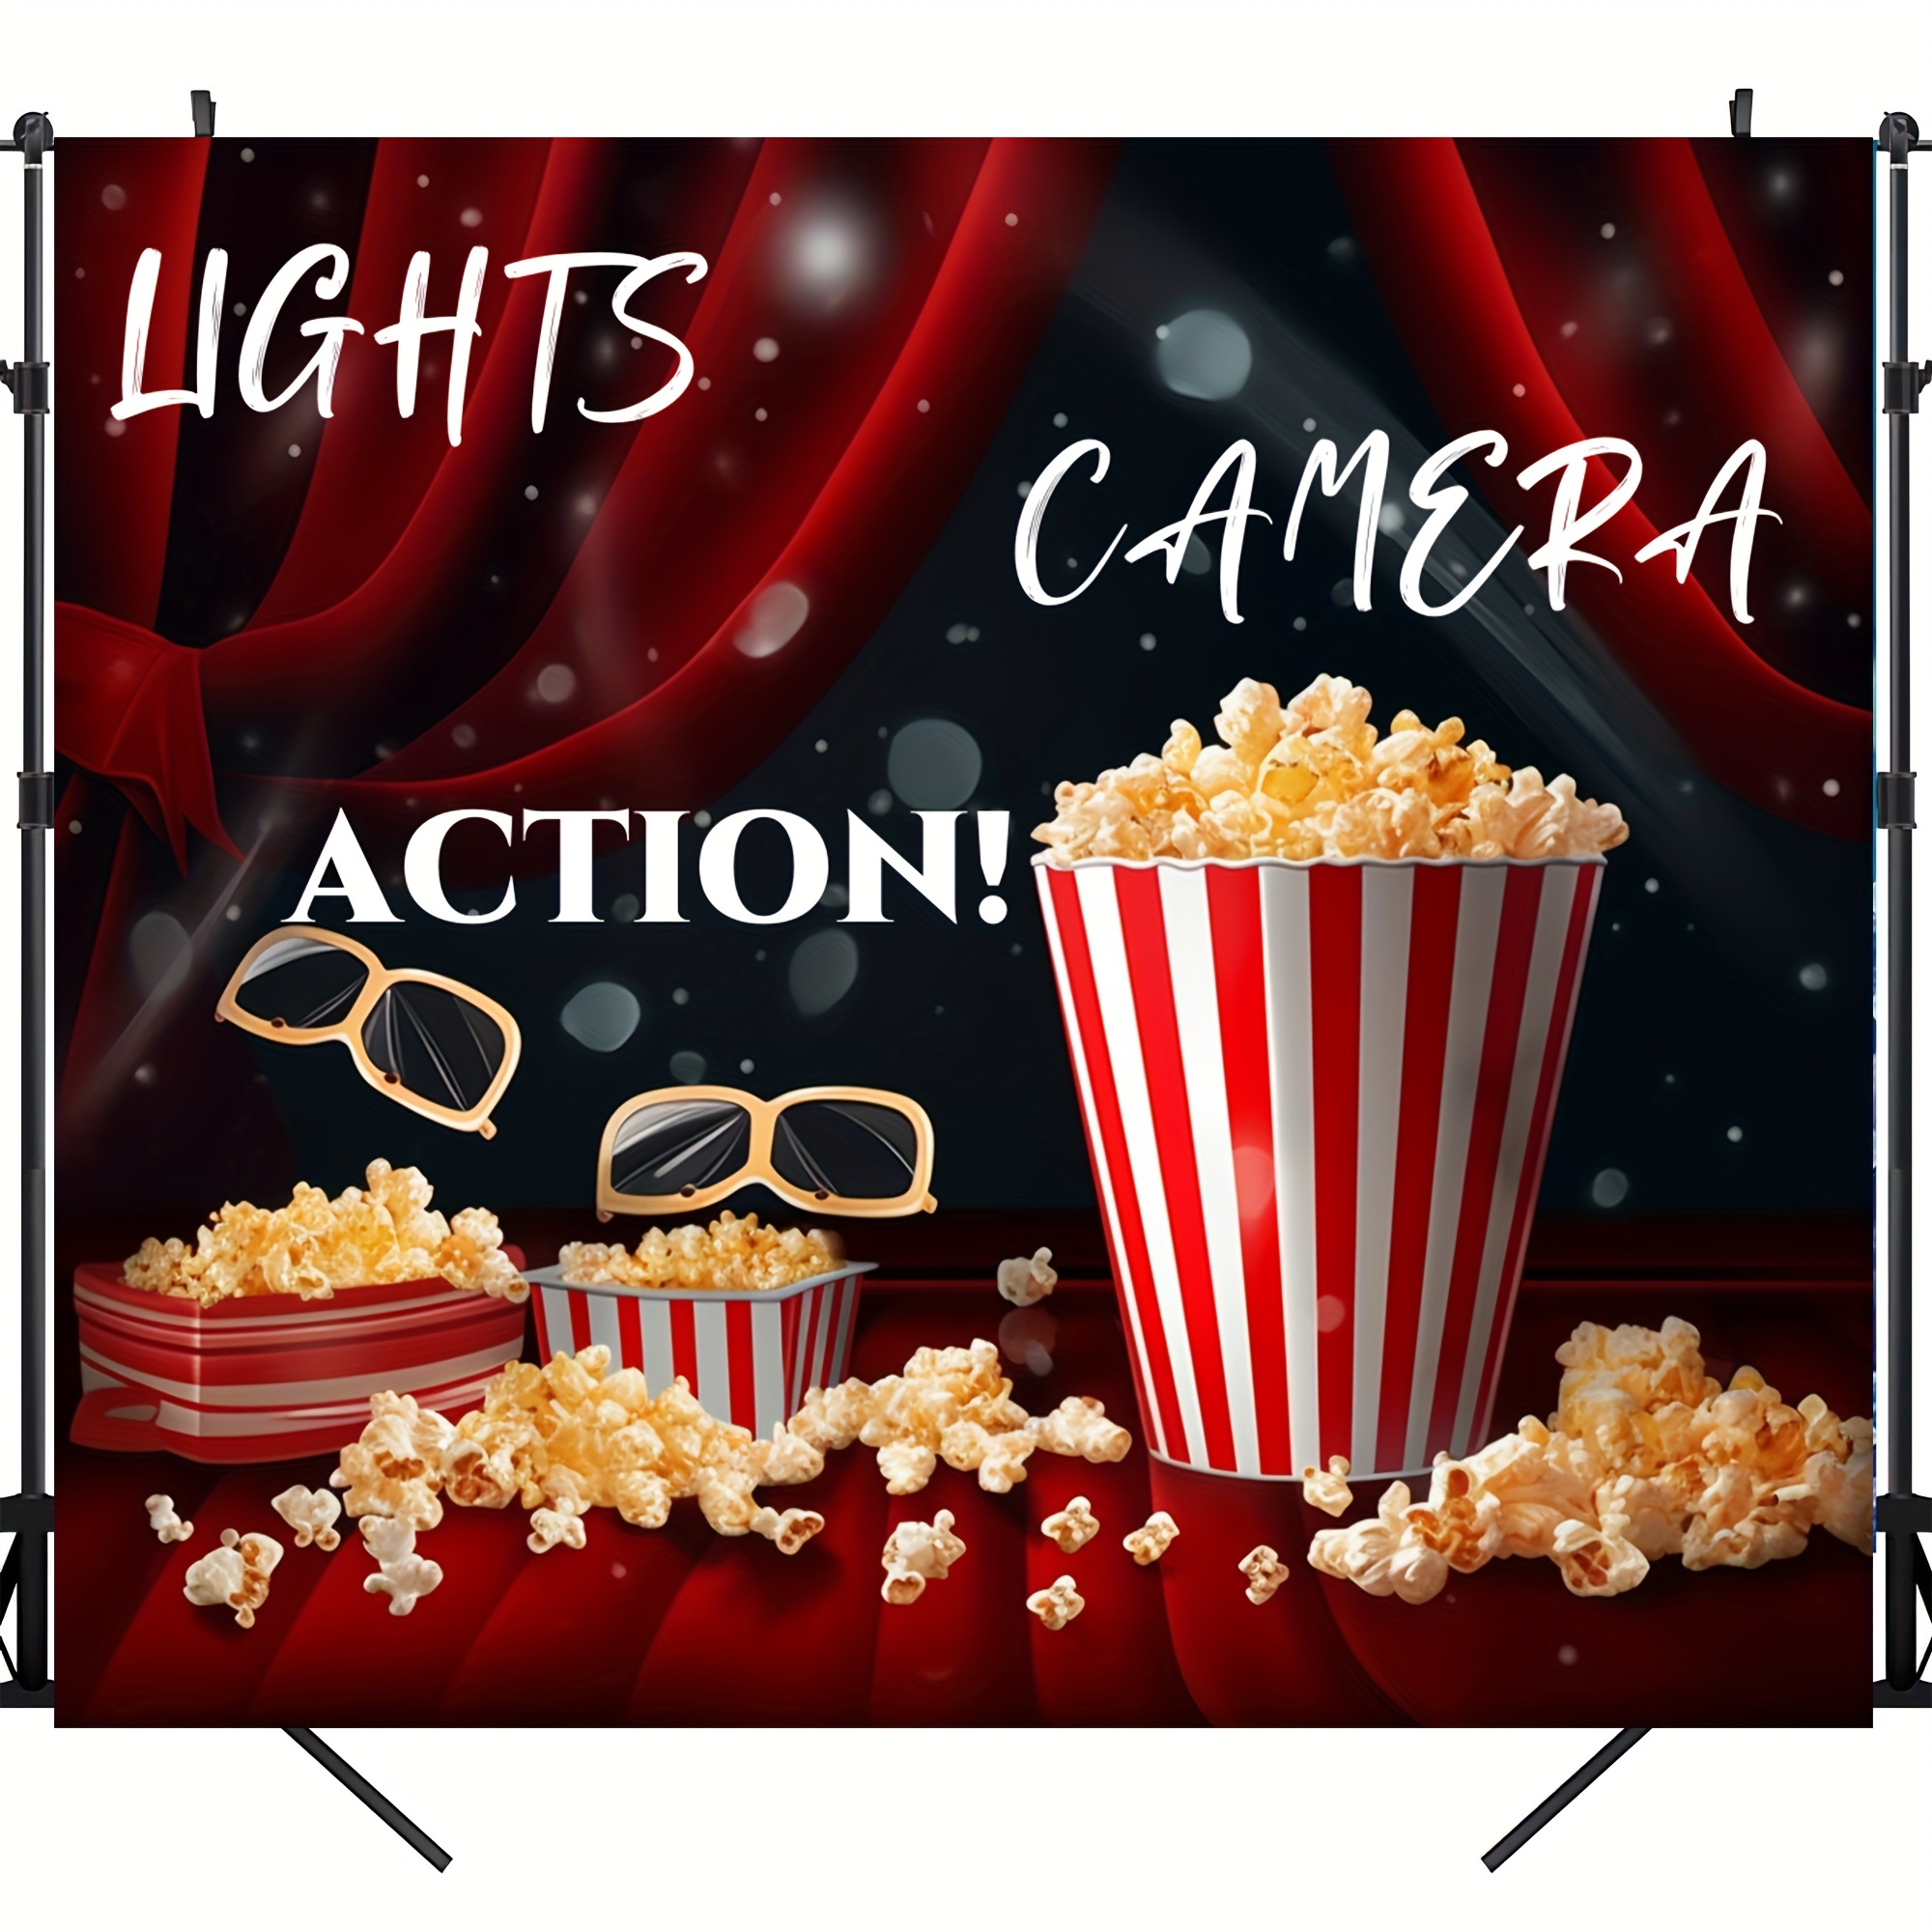 1pc, Movie Theater Theme Background Photo Props, Polyester Banner Decor,  Home Decor, Room Decor, Wall Decor, Party Background Decor, Party  Decor/suppl